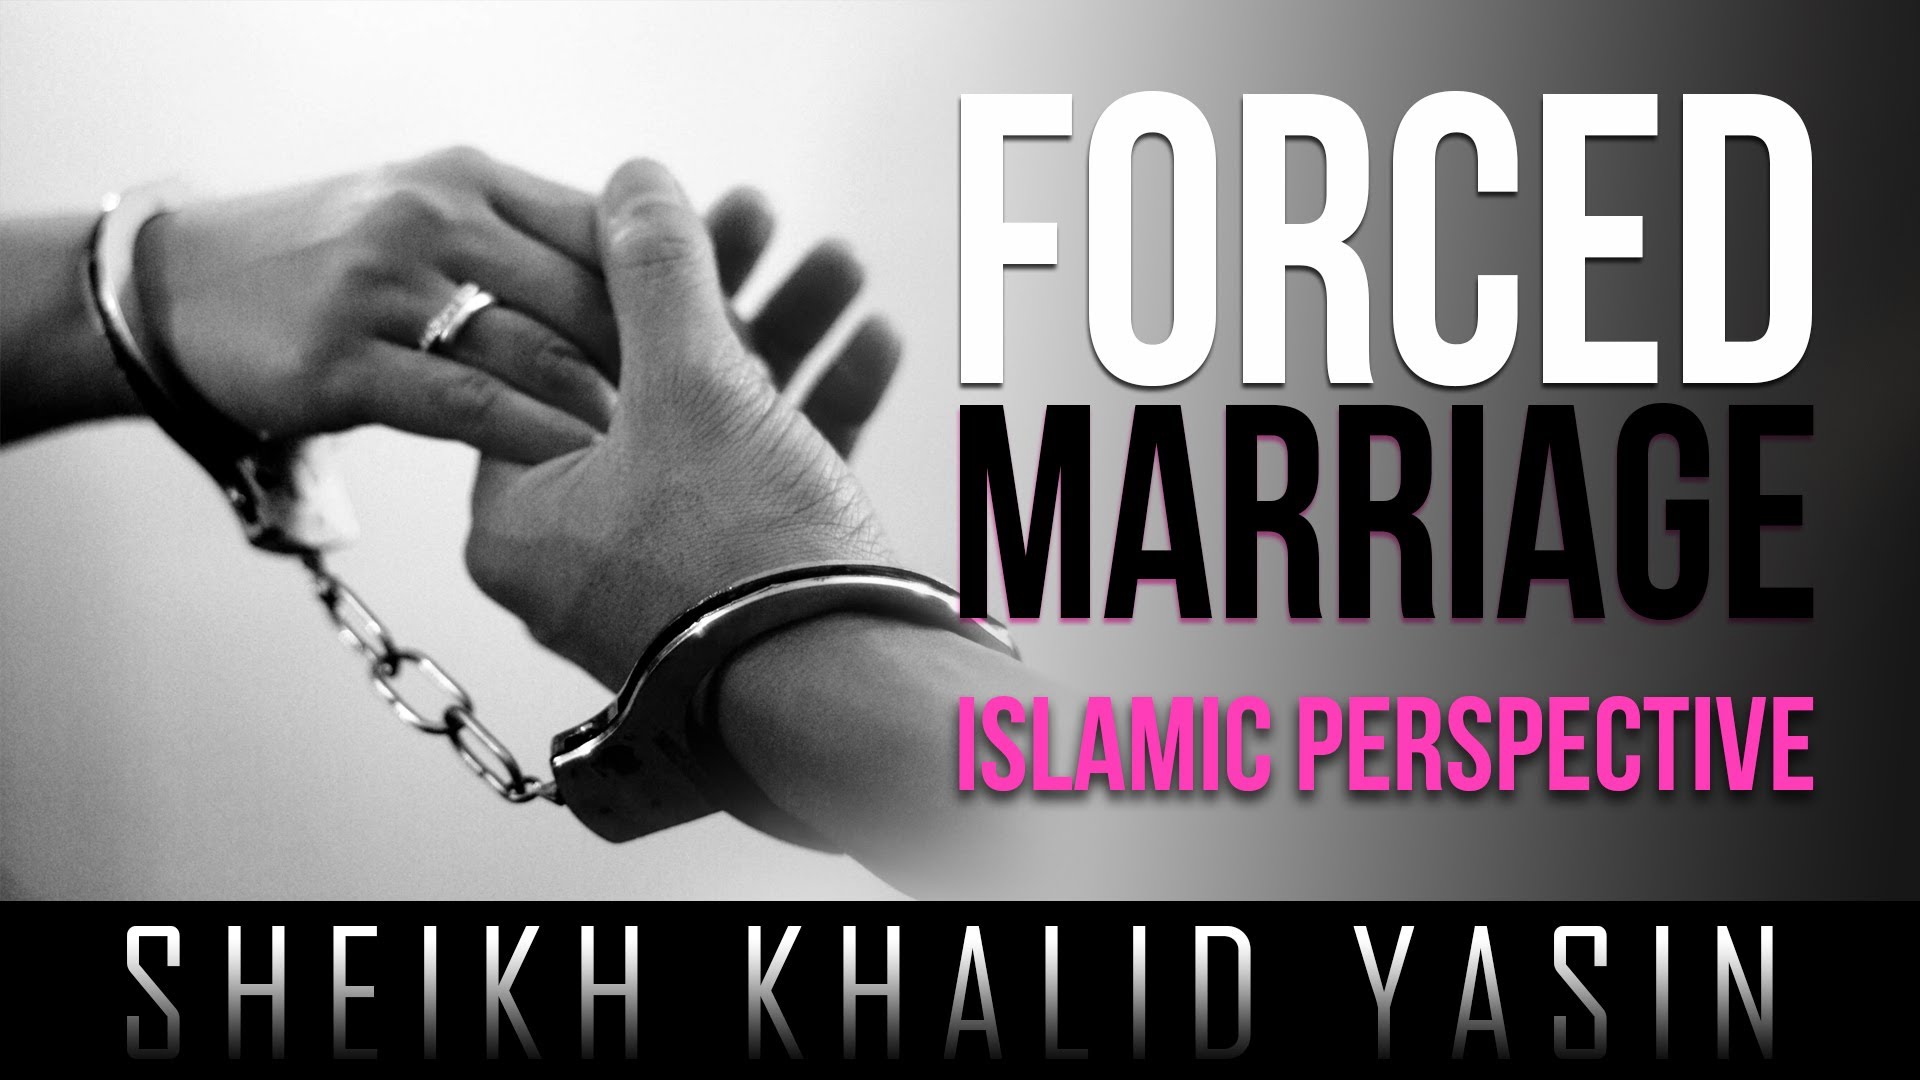 Pressured or Forced Marriage – Misconceptions & Facts - About Islam